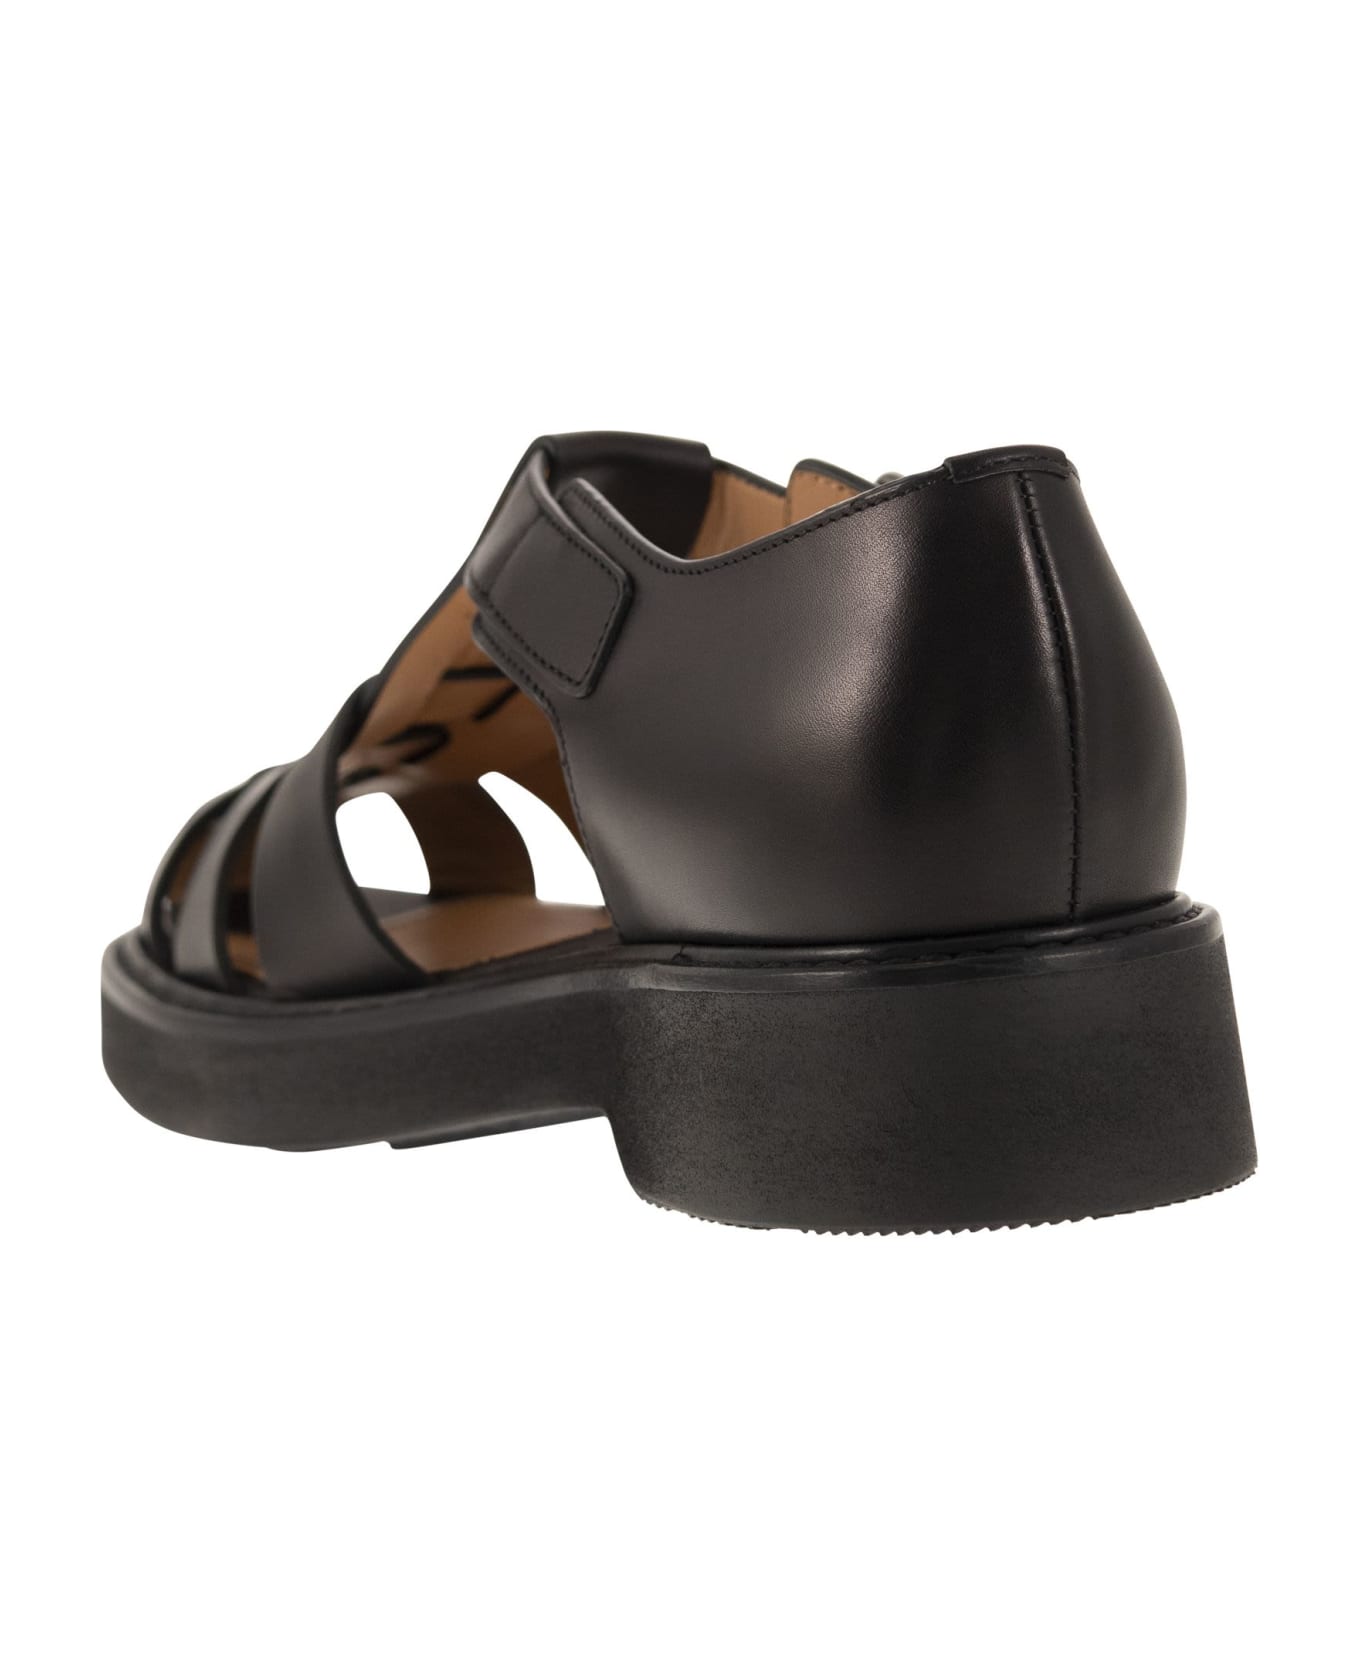 Church's Hove - Leather Sandals - Black